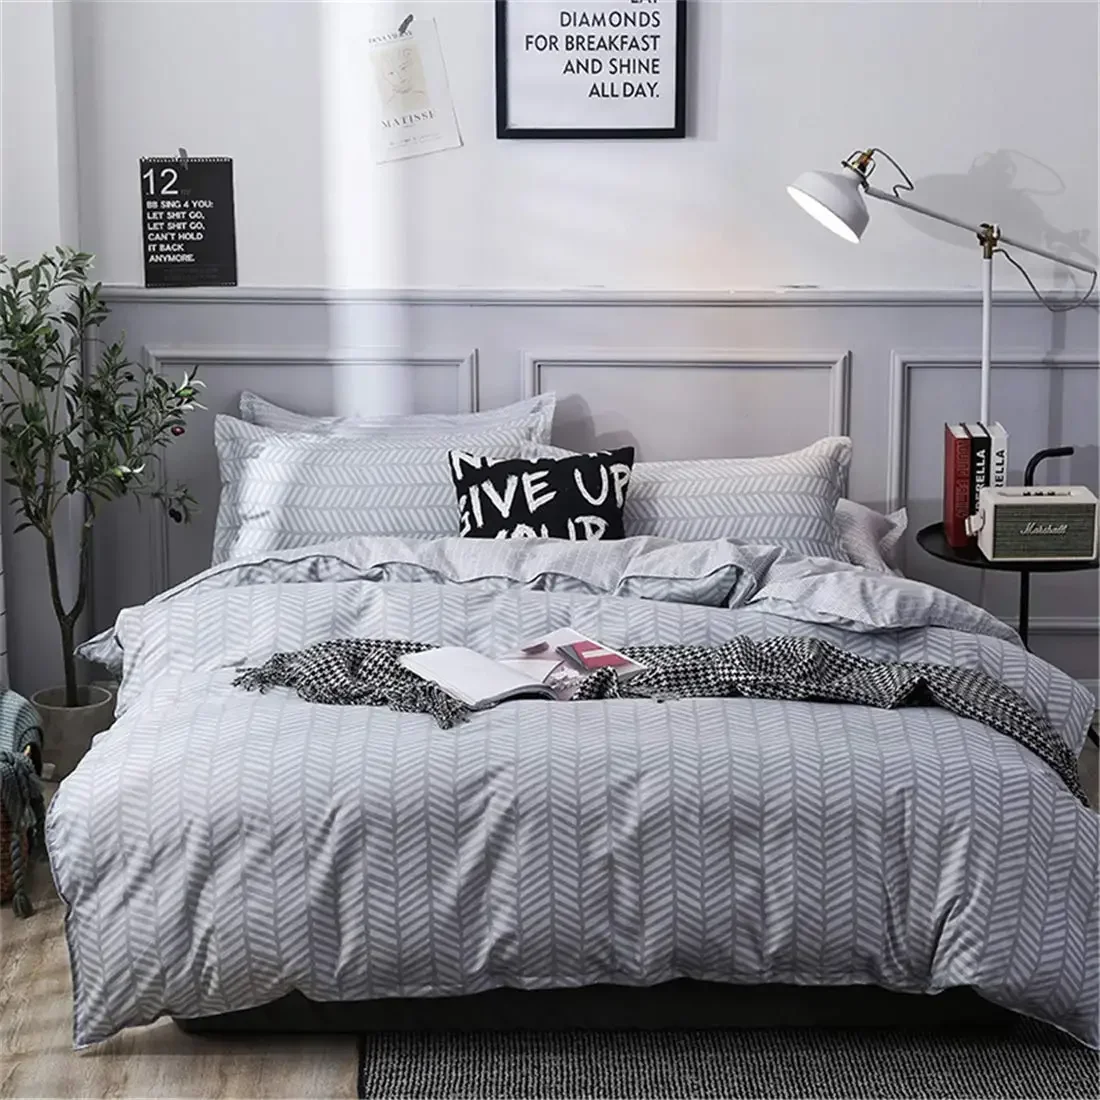 stripe-modern-duvet-cover-twill-bedding-set-geometric-white-and-grey-distressed-rugby-stripes-print-shades-reversible-white-gray